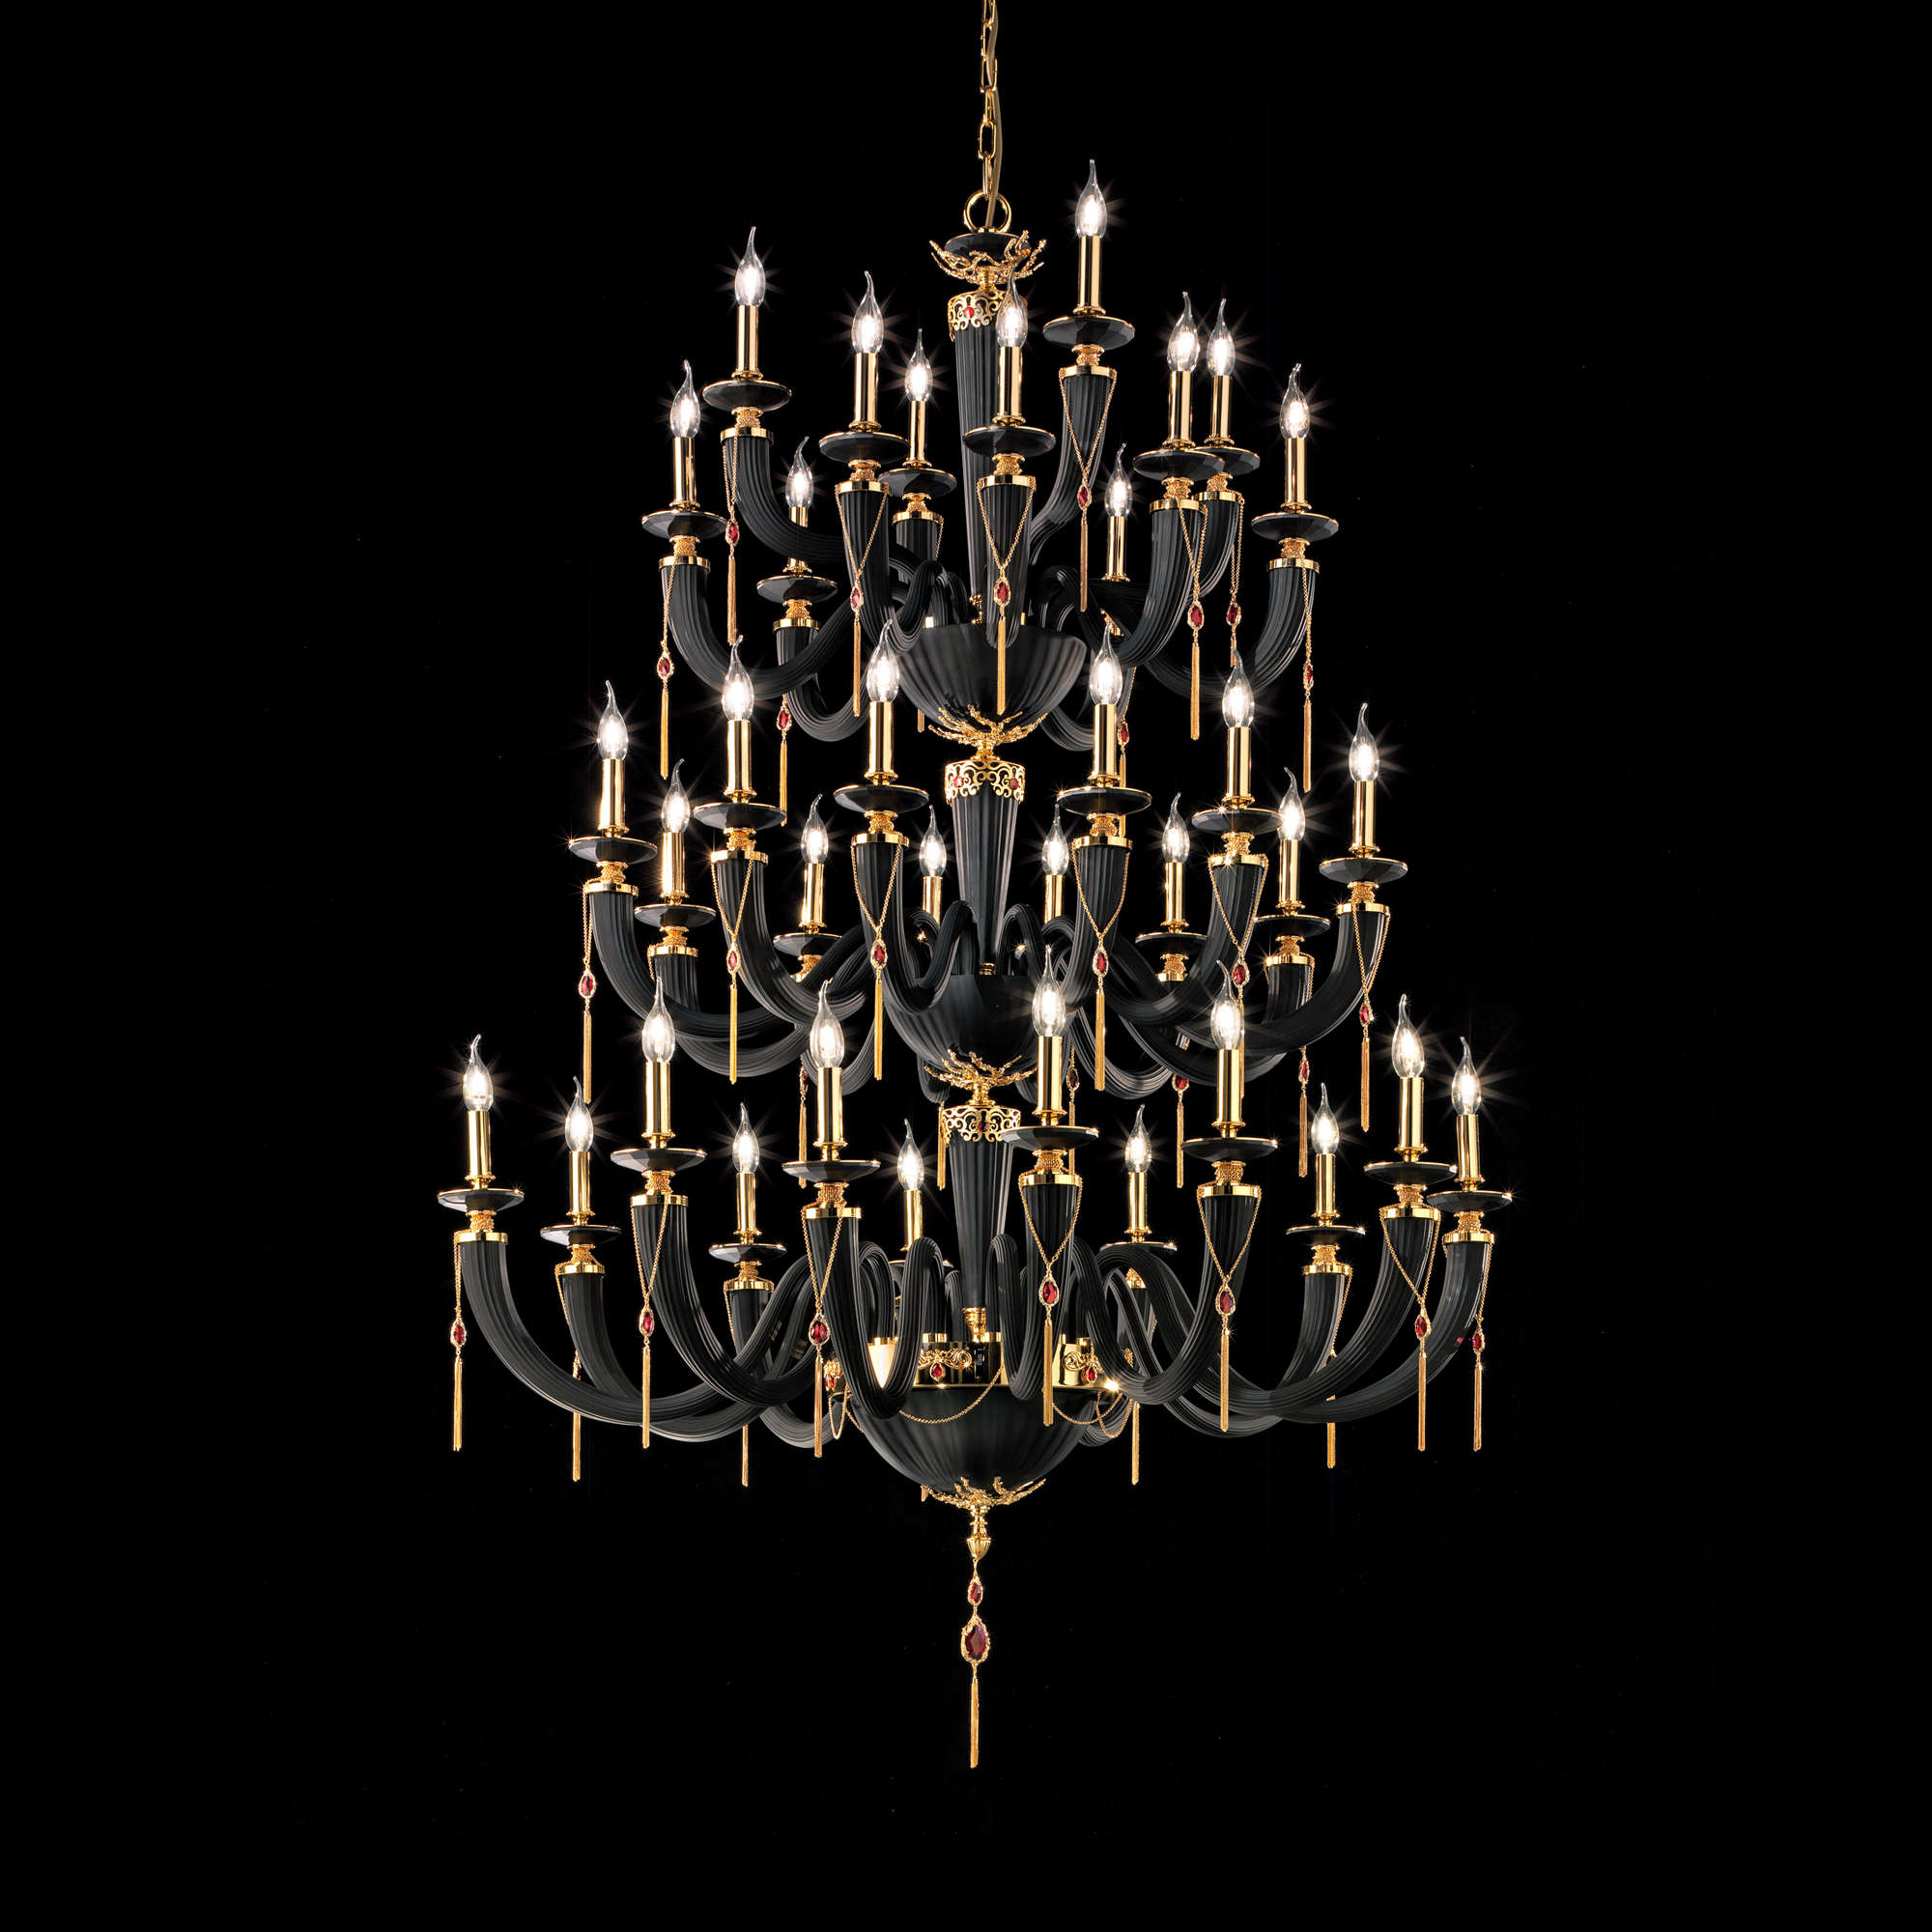 Large Classic Black Chandelier With Swarovski® Crystals